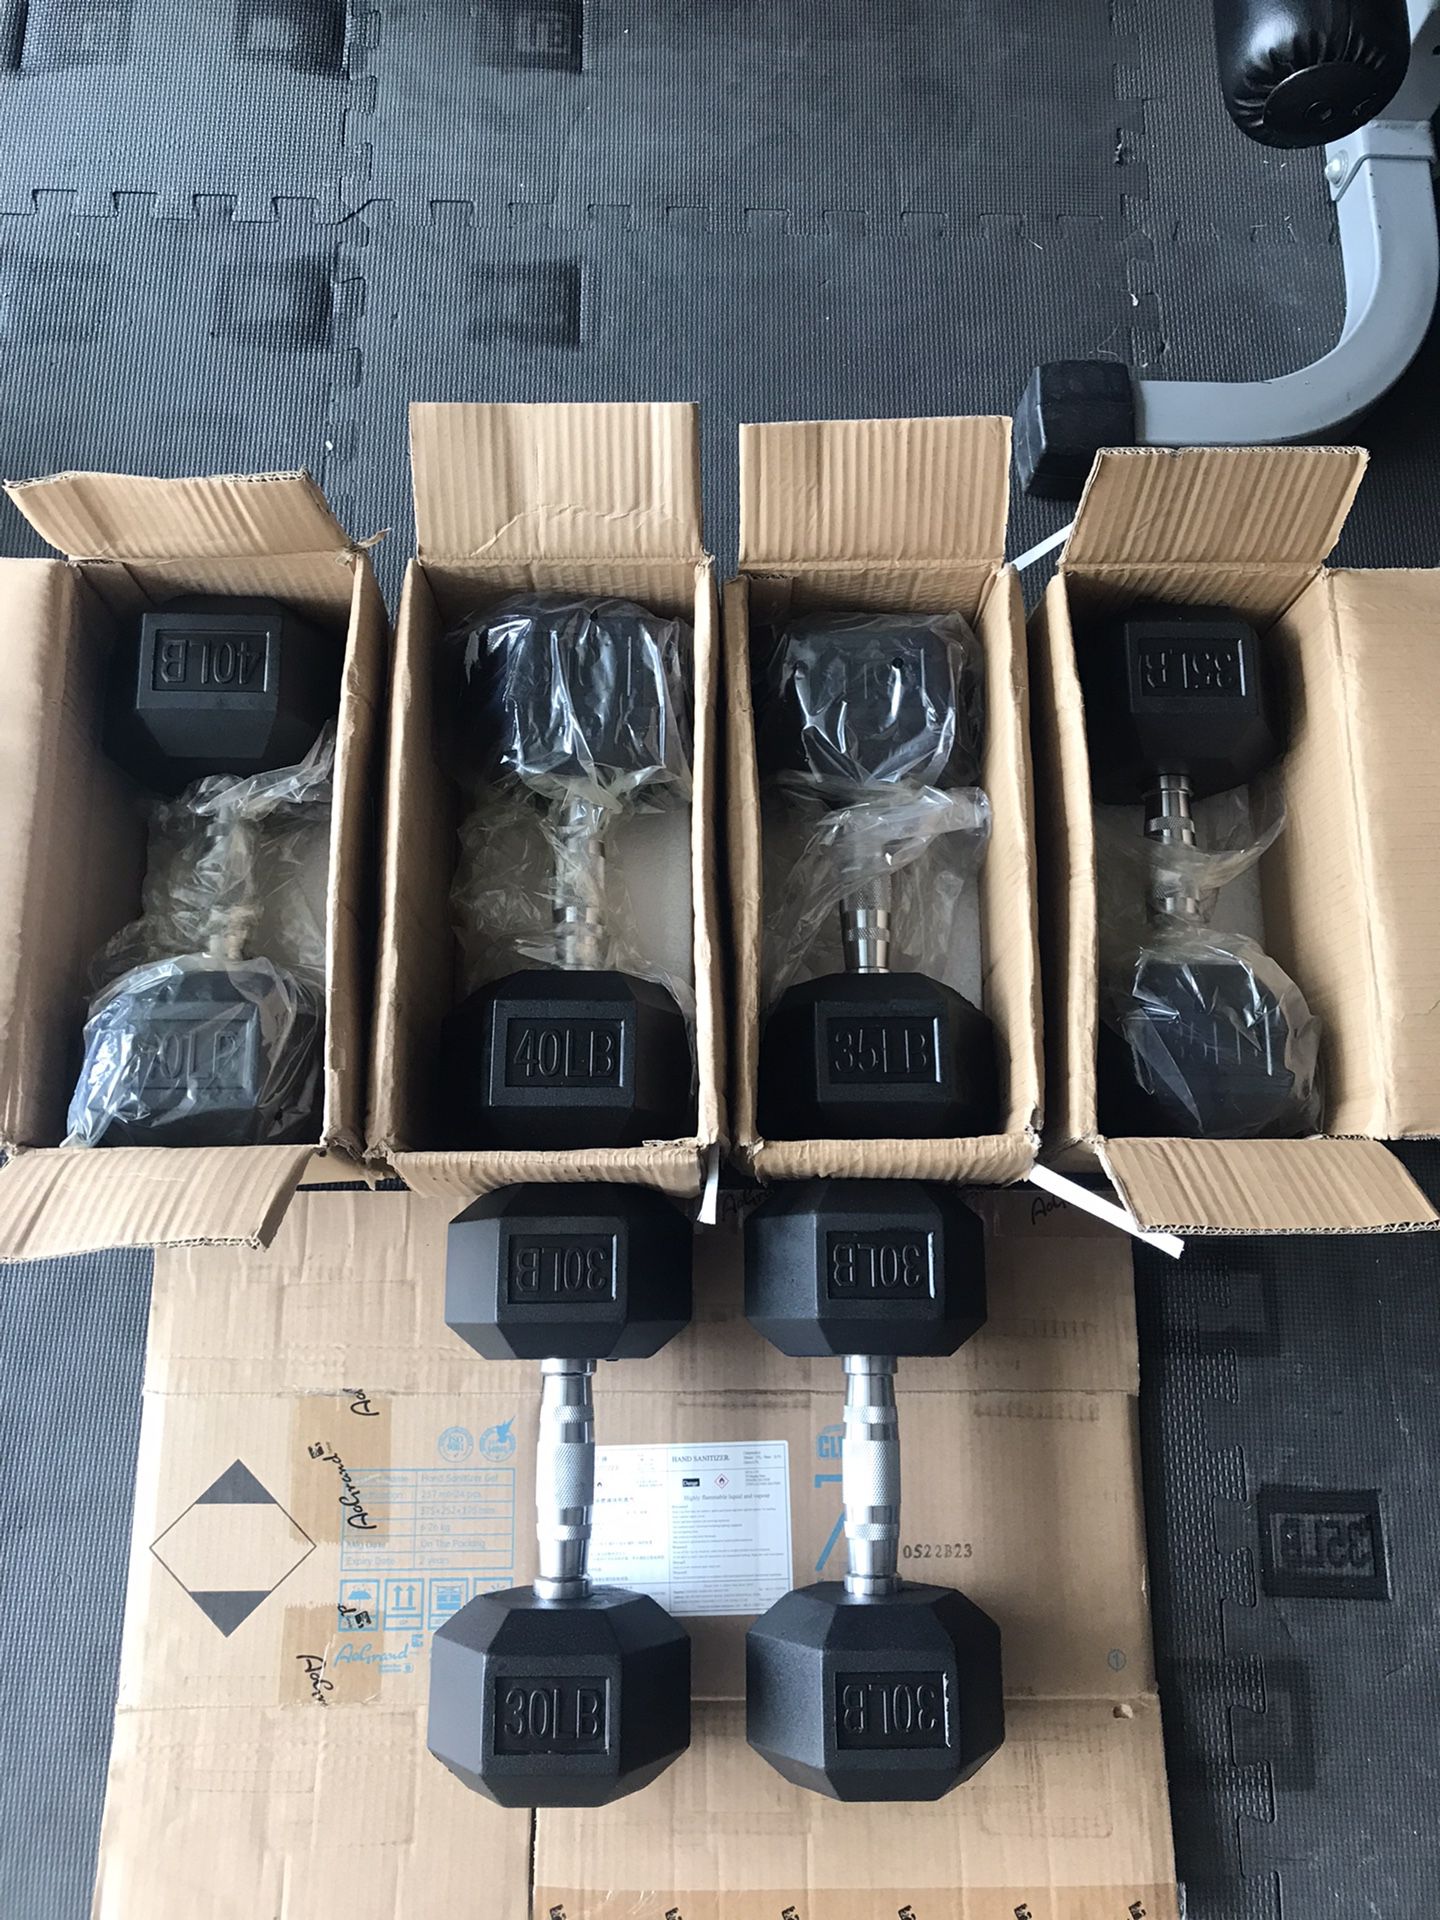 New Rubber Coated Hex Dumbbells (2x30Lbs, 2x35Lbs, 2x40Lbs) for $160 Firm